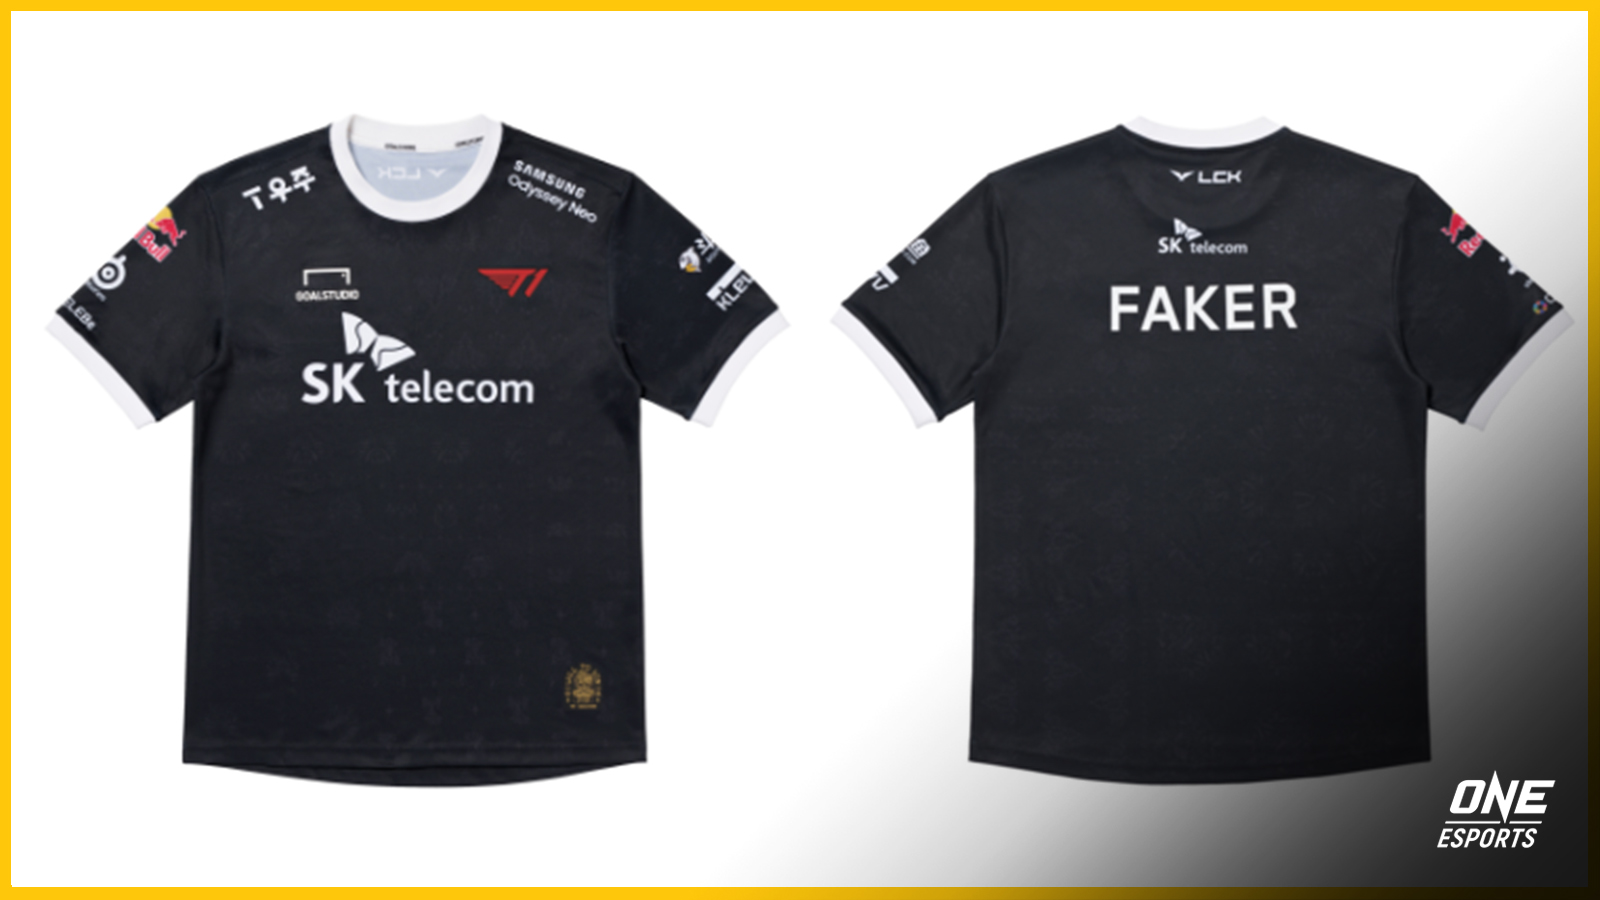 T1 Faker merch Release date, prices, where to buy ONE Esports